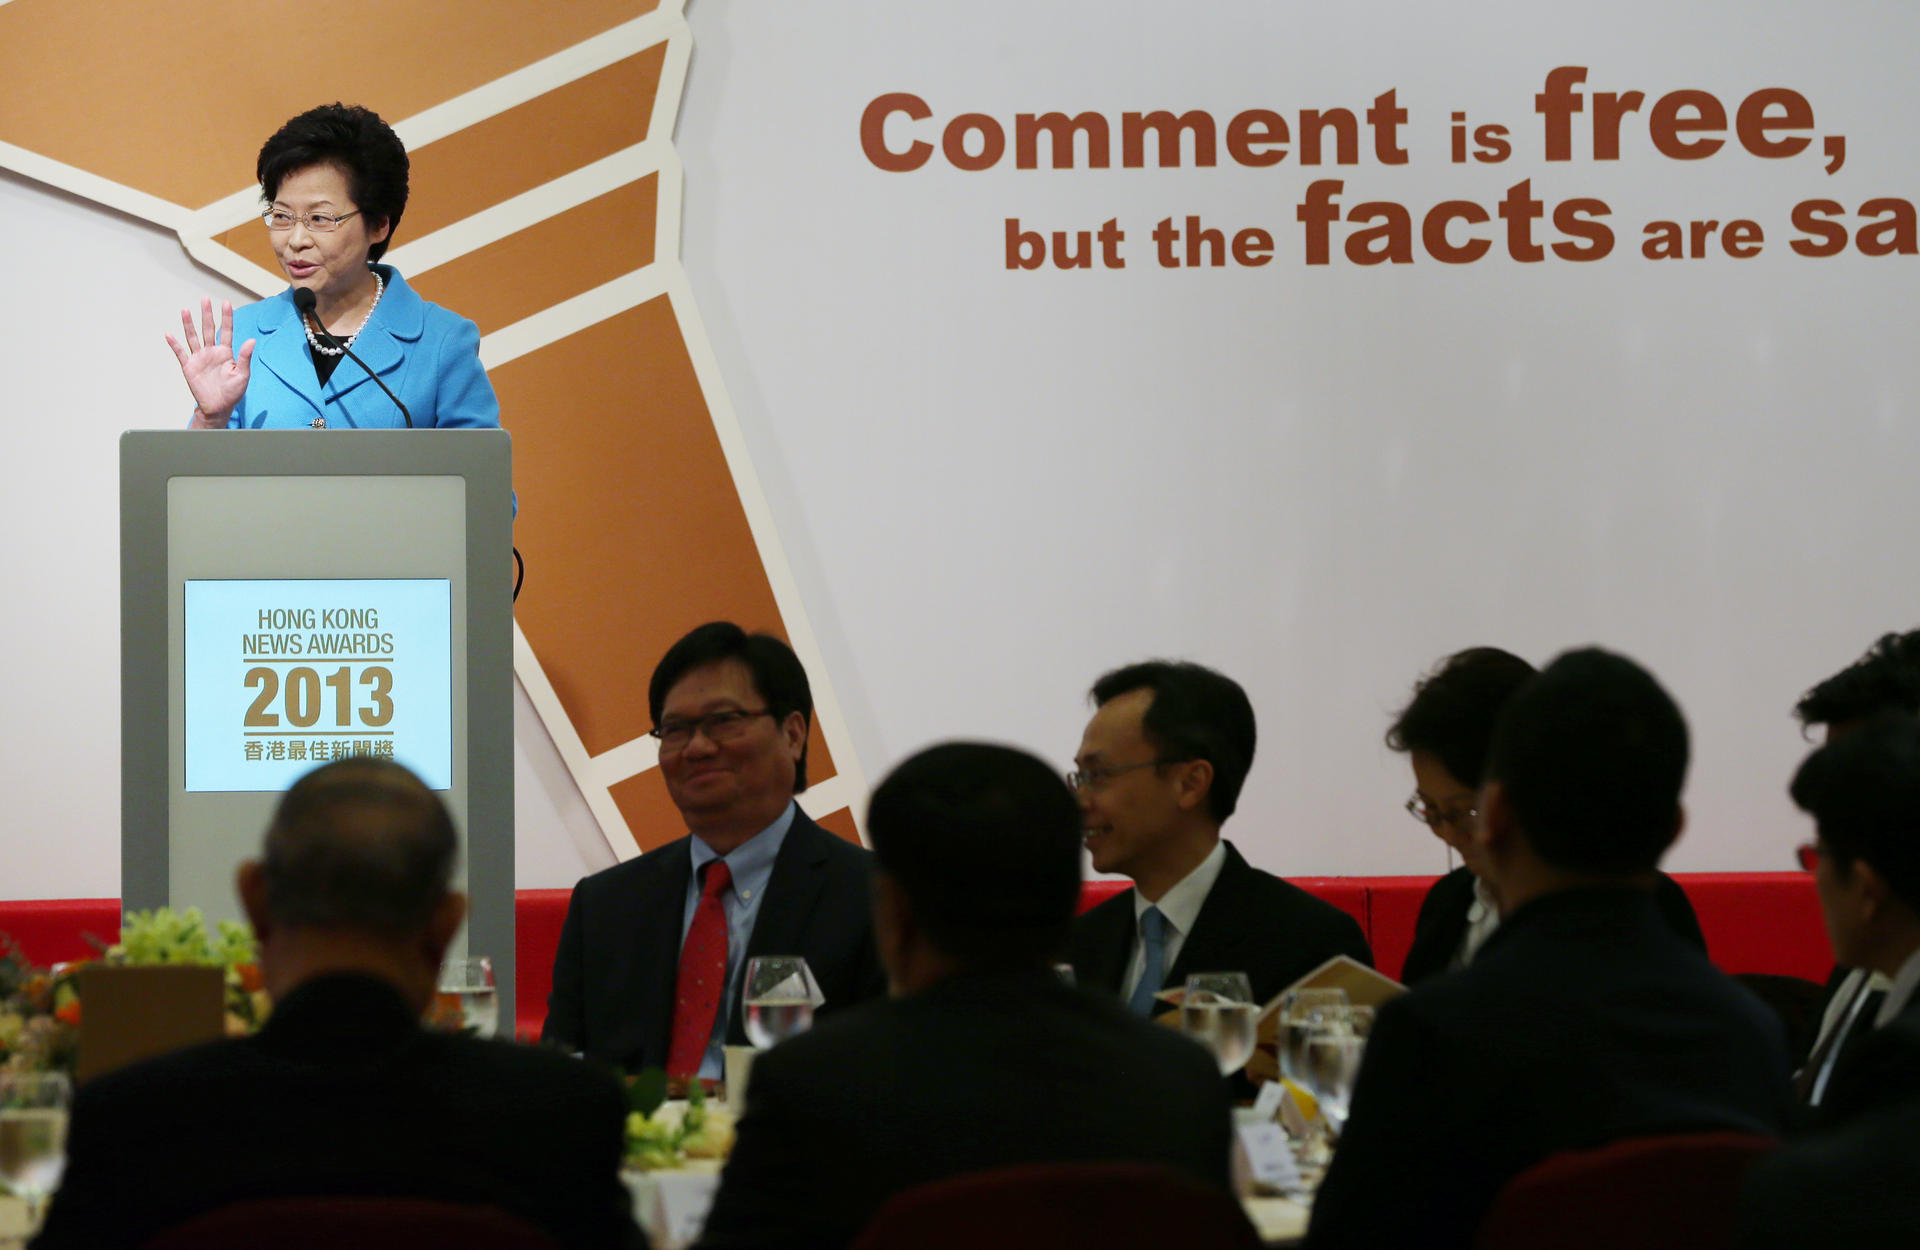 Chief Secretary Carrie Lam Cheng Yuet-ngor urged citizens to think carefully before deciding whether to support any of the three proposals on offer in Occupy Central's vote.